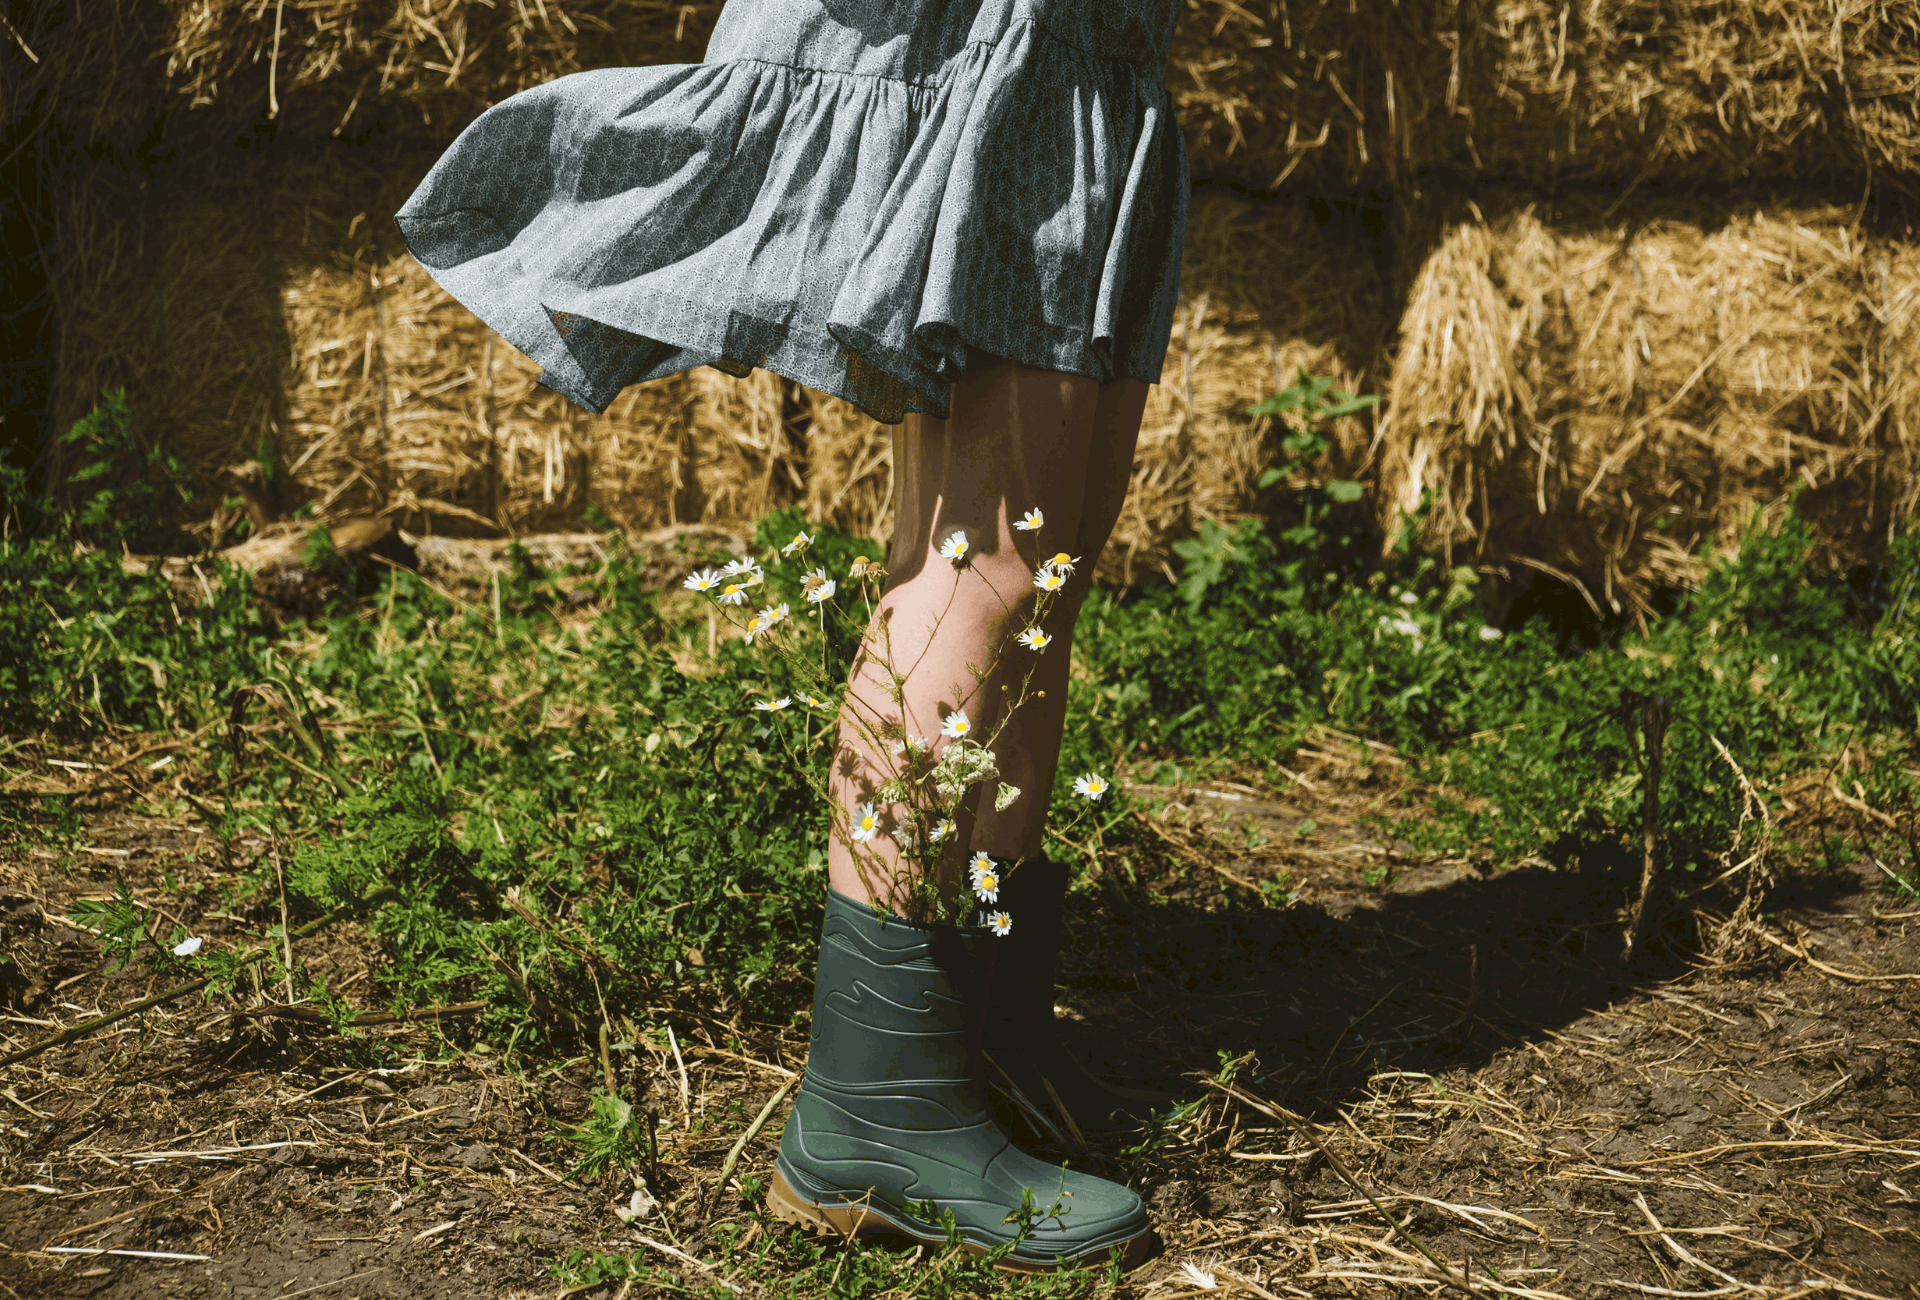 Girl with flowers sticking out of her raiboots.